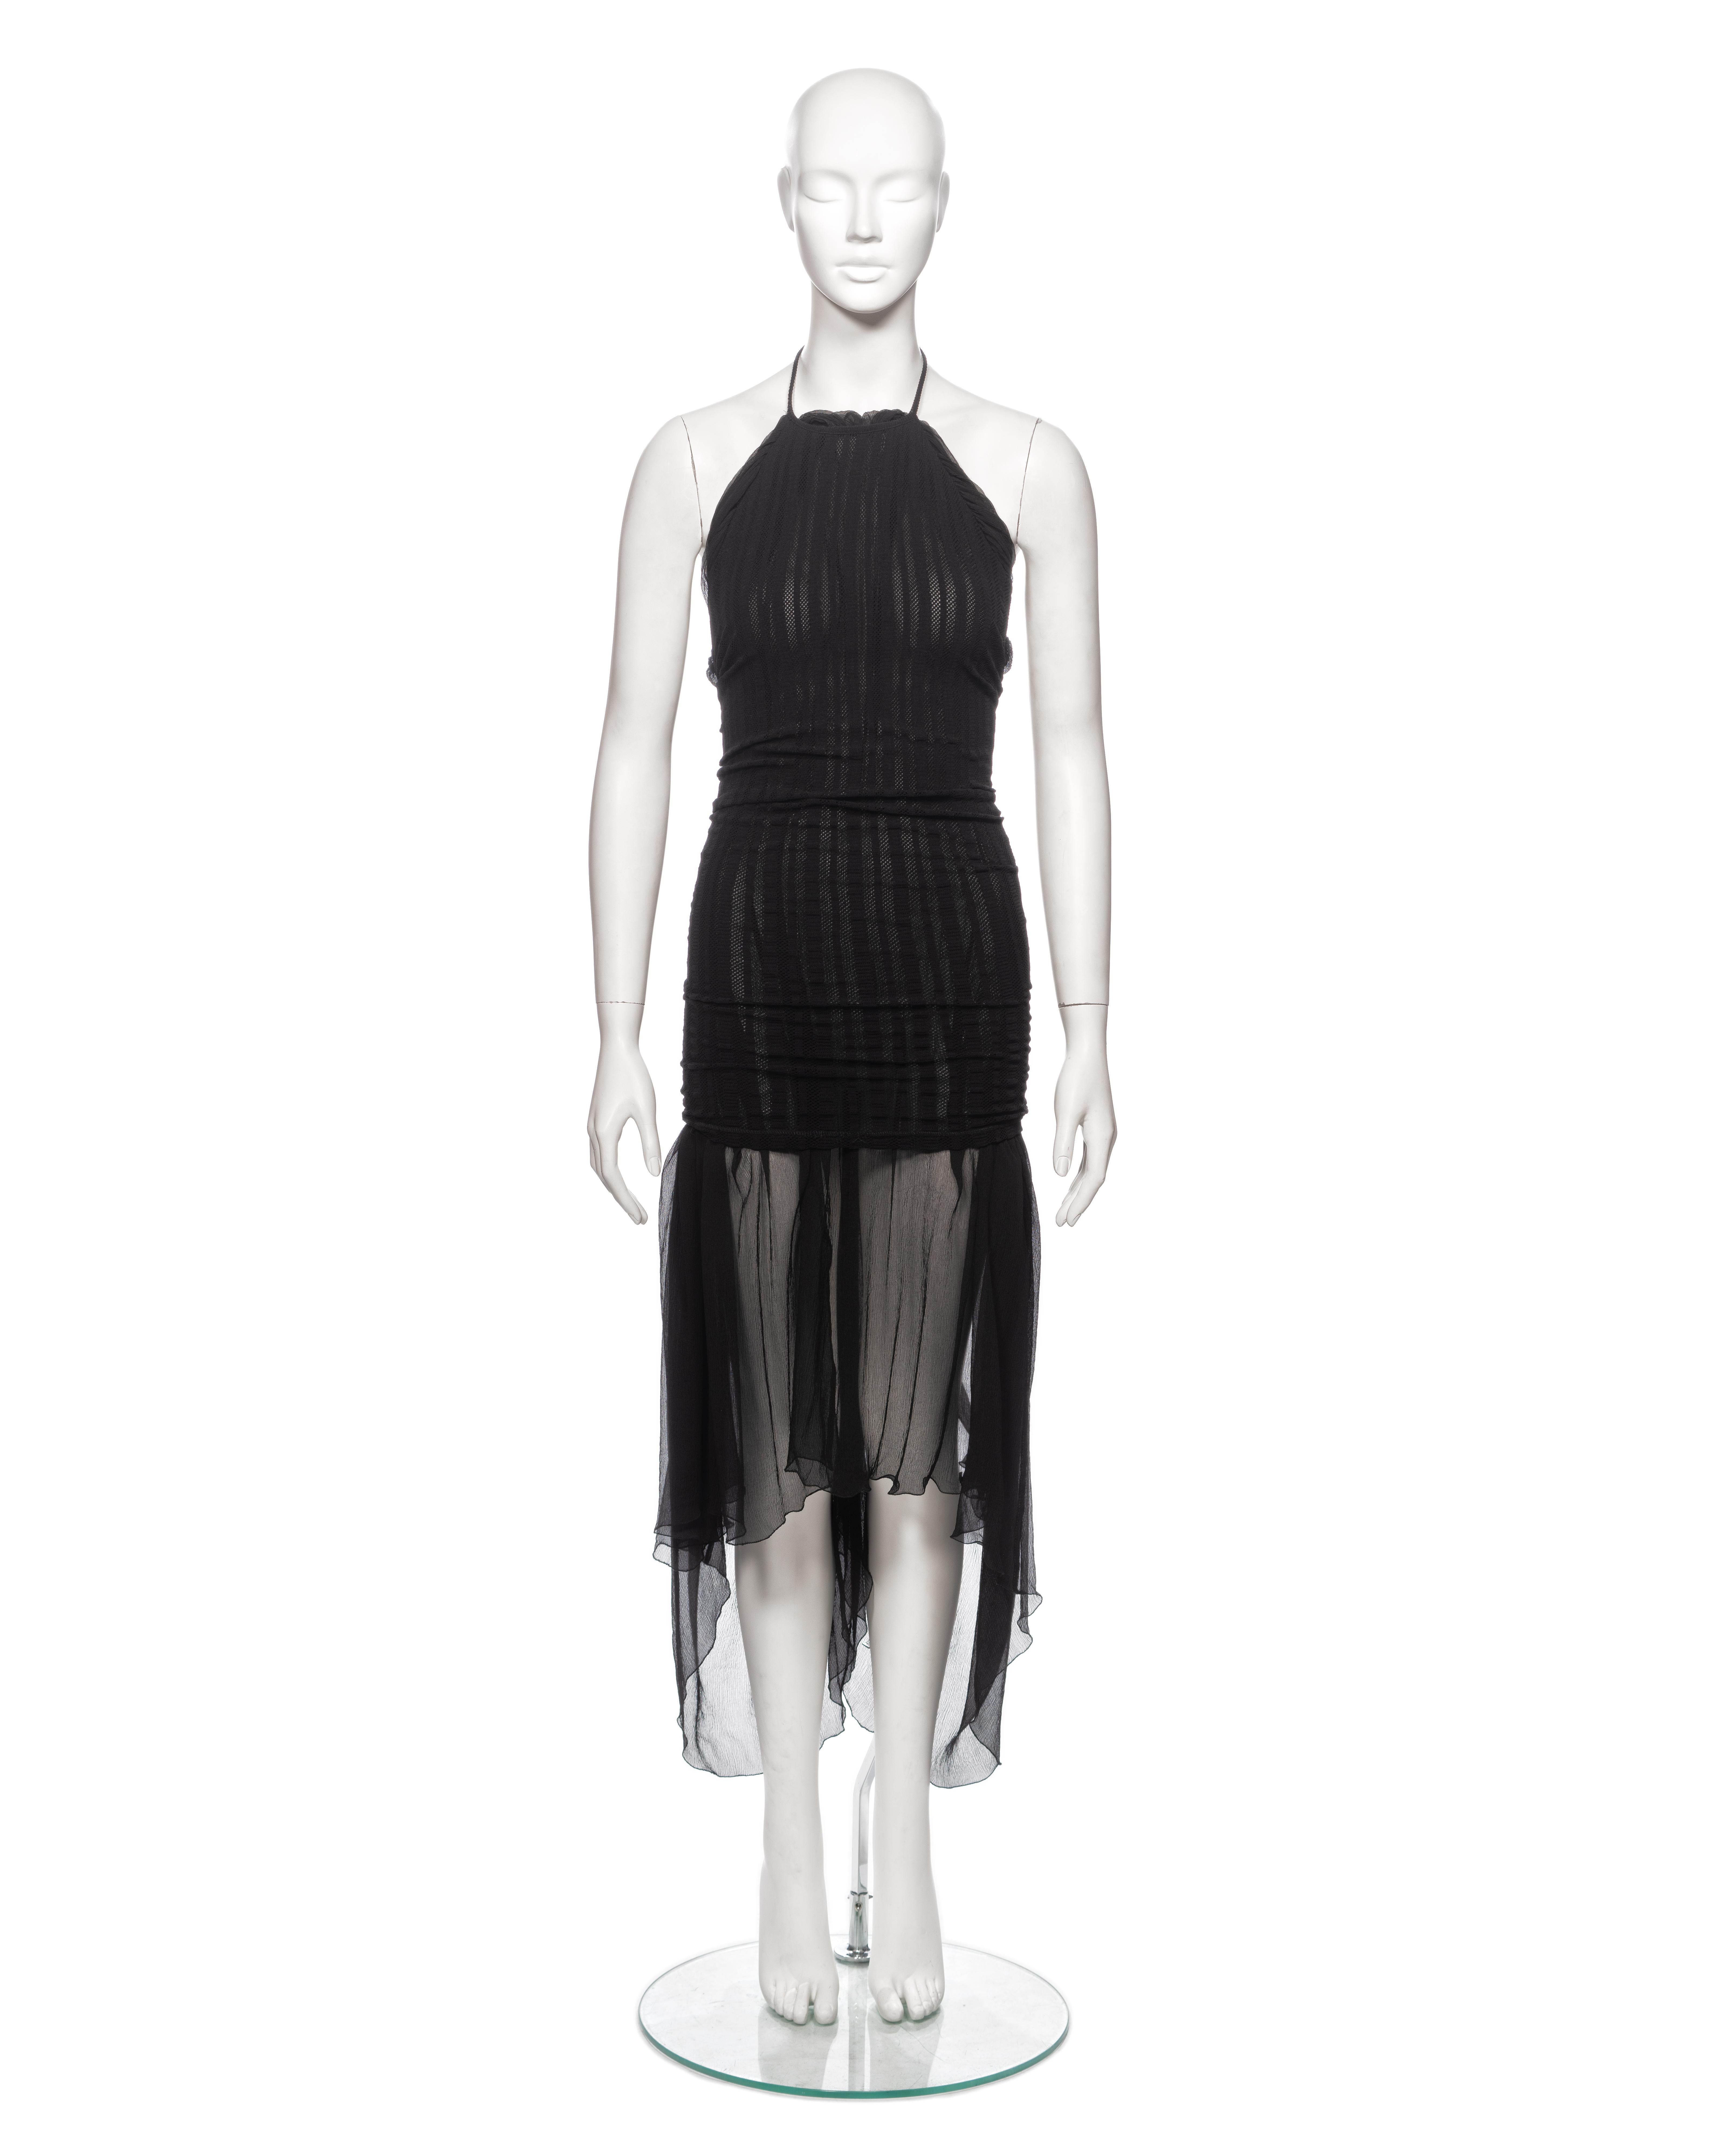 ▪ Brand: Jean Paul Gaultier
▪ Creative Director: Jean Paul Gaultier
▪ Collection: Spring-Summer 2001
▪ Fabric: Black Silk Chiffon, Synthetic Stretch Mesh
▪ Details: Halter-neck, silk chiffon underlay allows for multiple styling options, five string